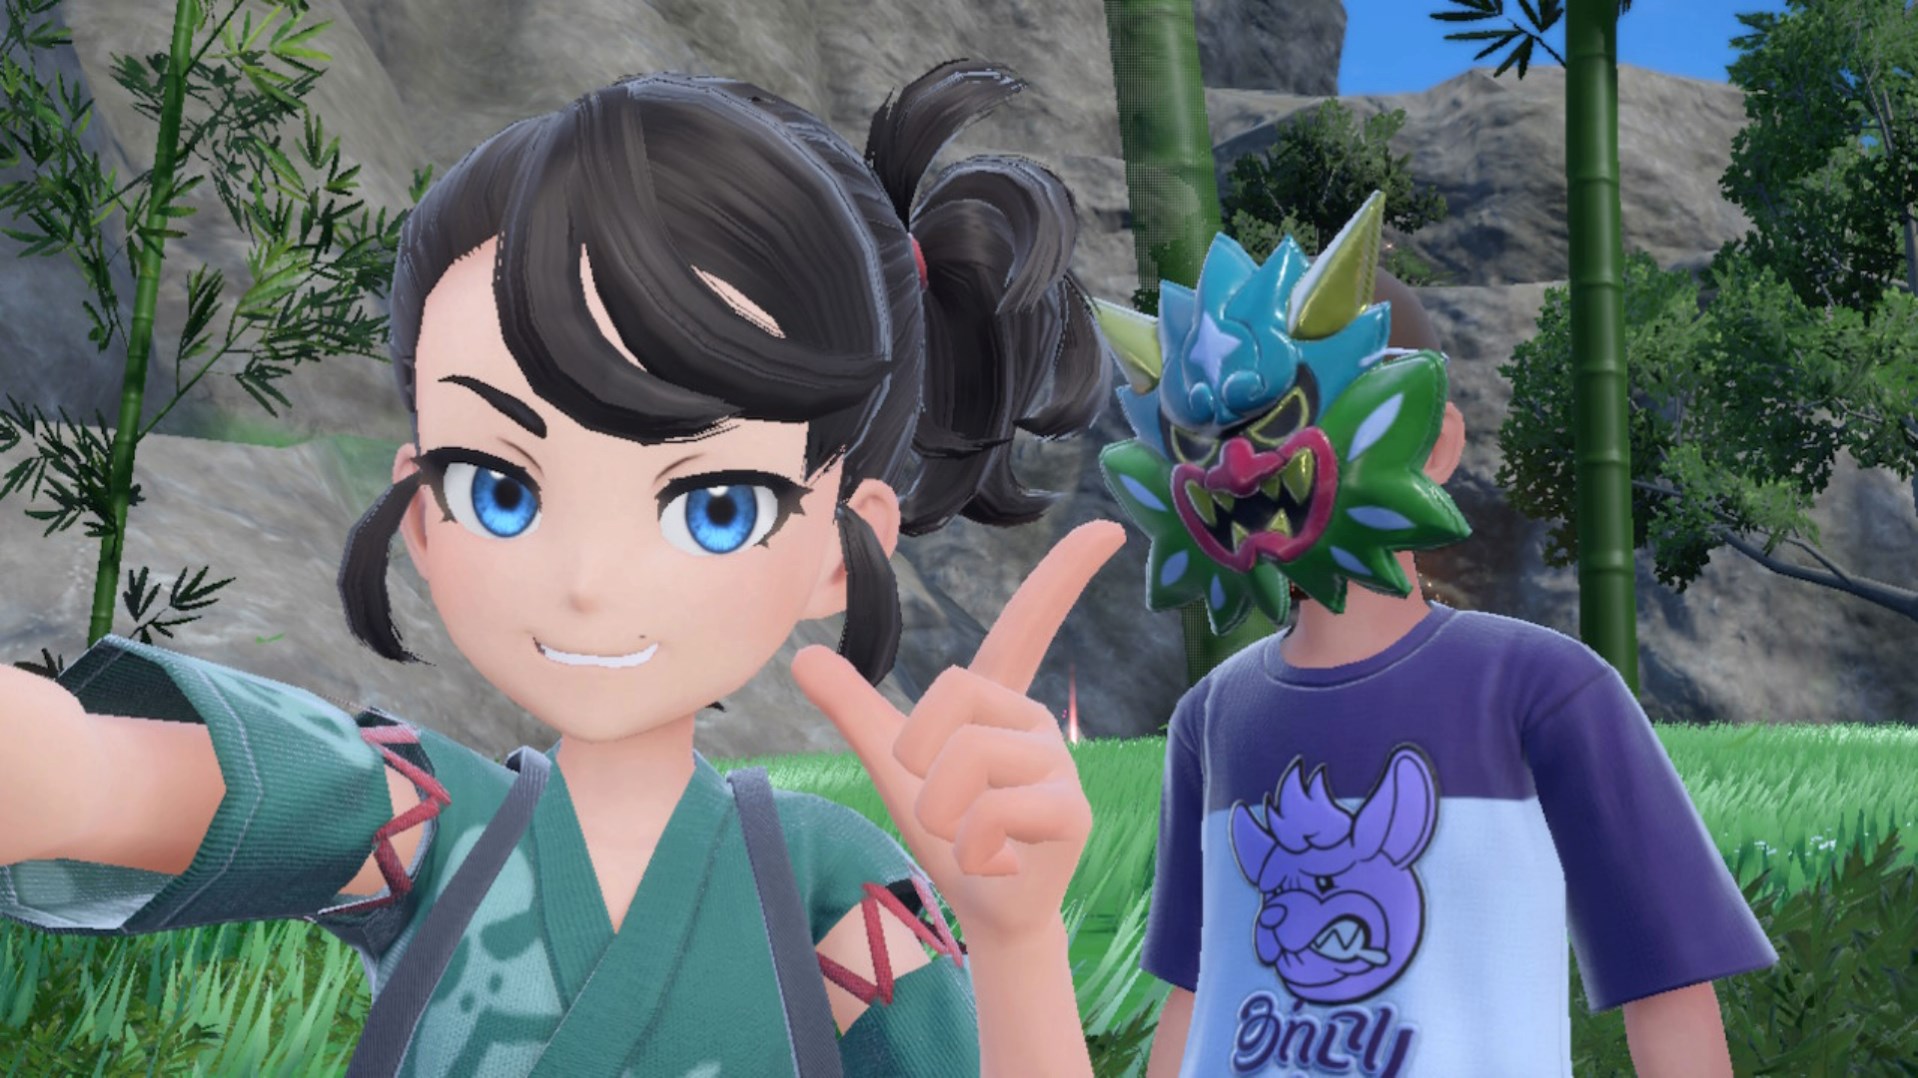 A Pokémon trainer takes a selfie with an Ogre Clan member in Pokémon Scarlet and Violet